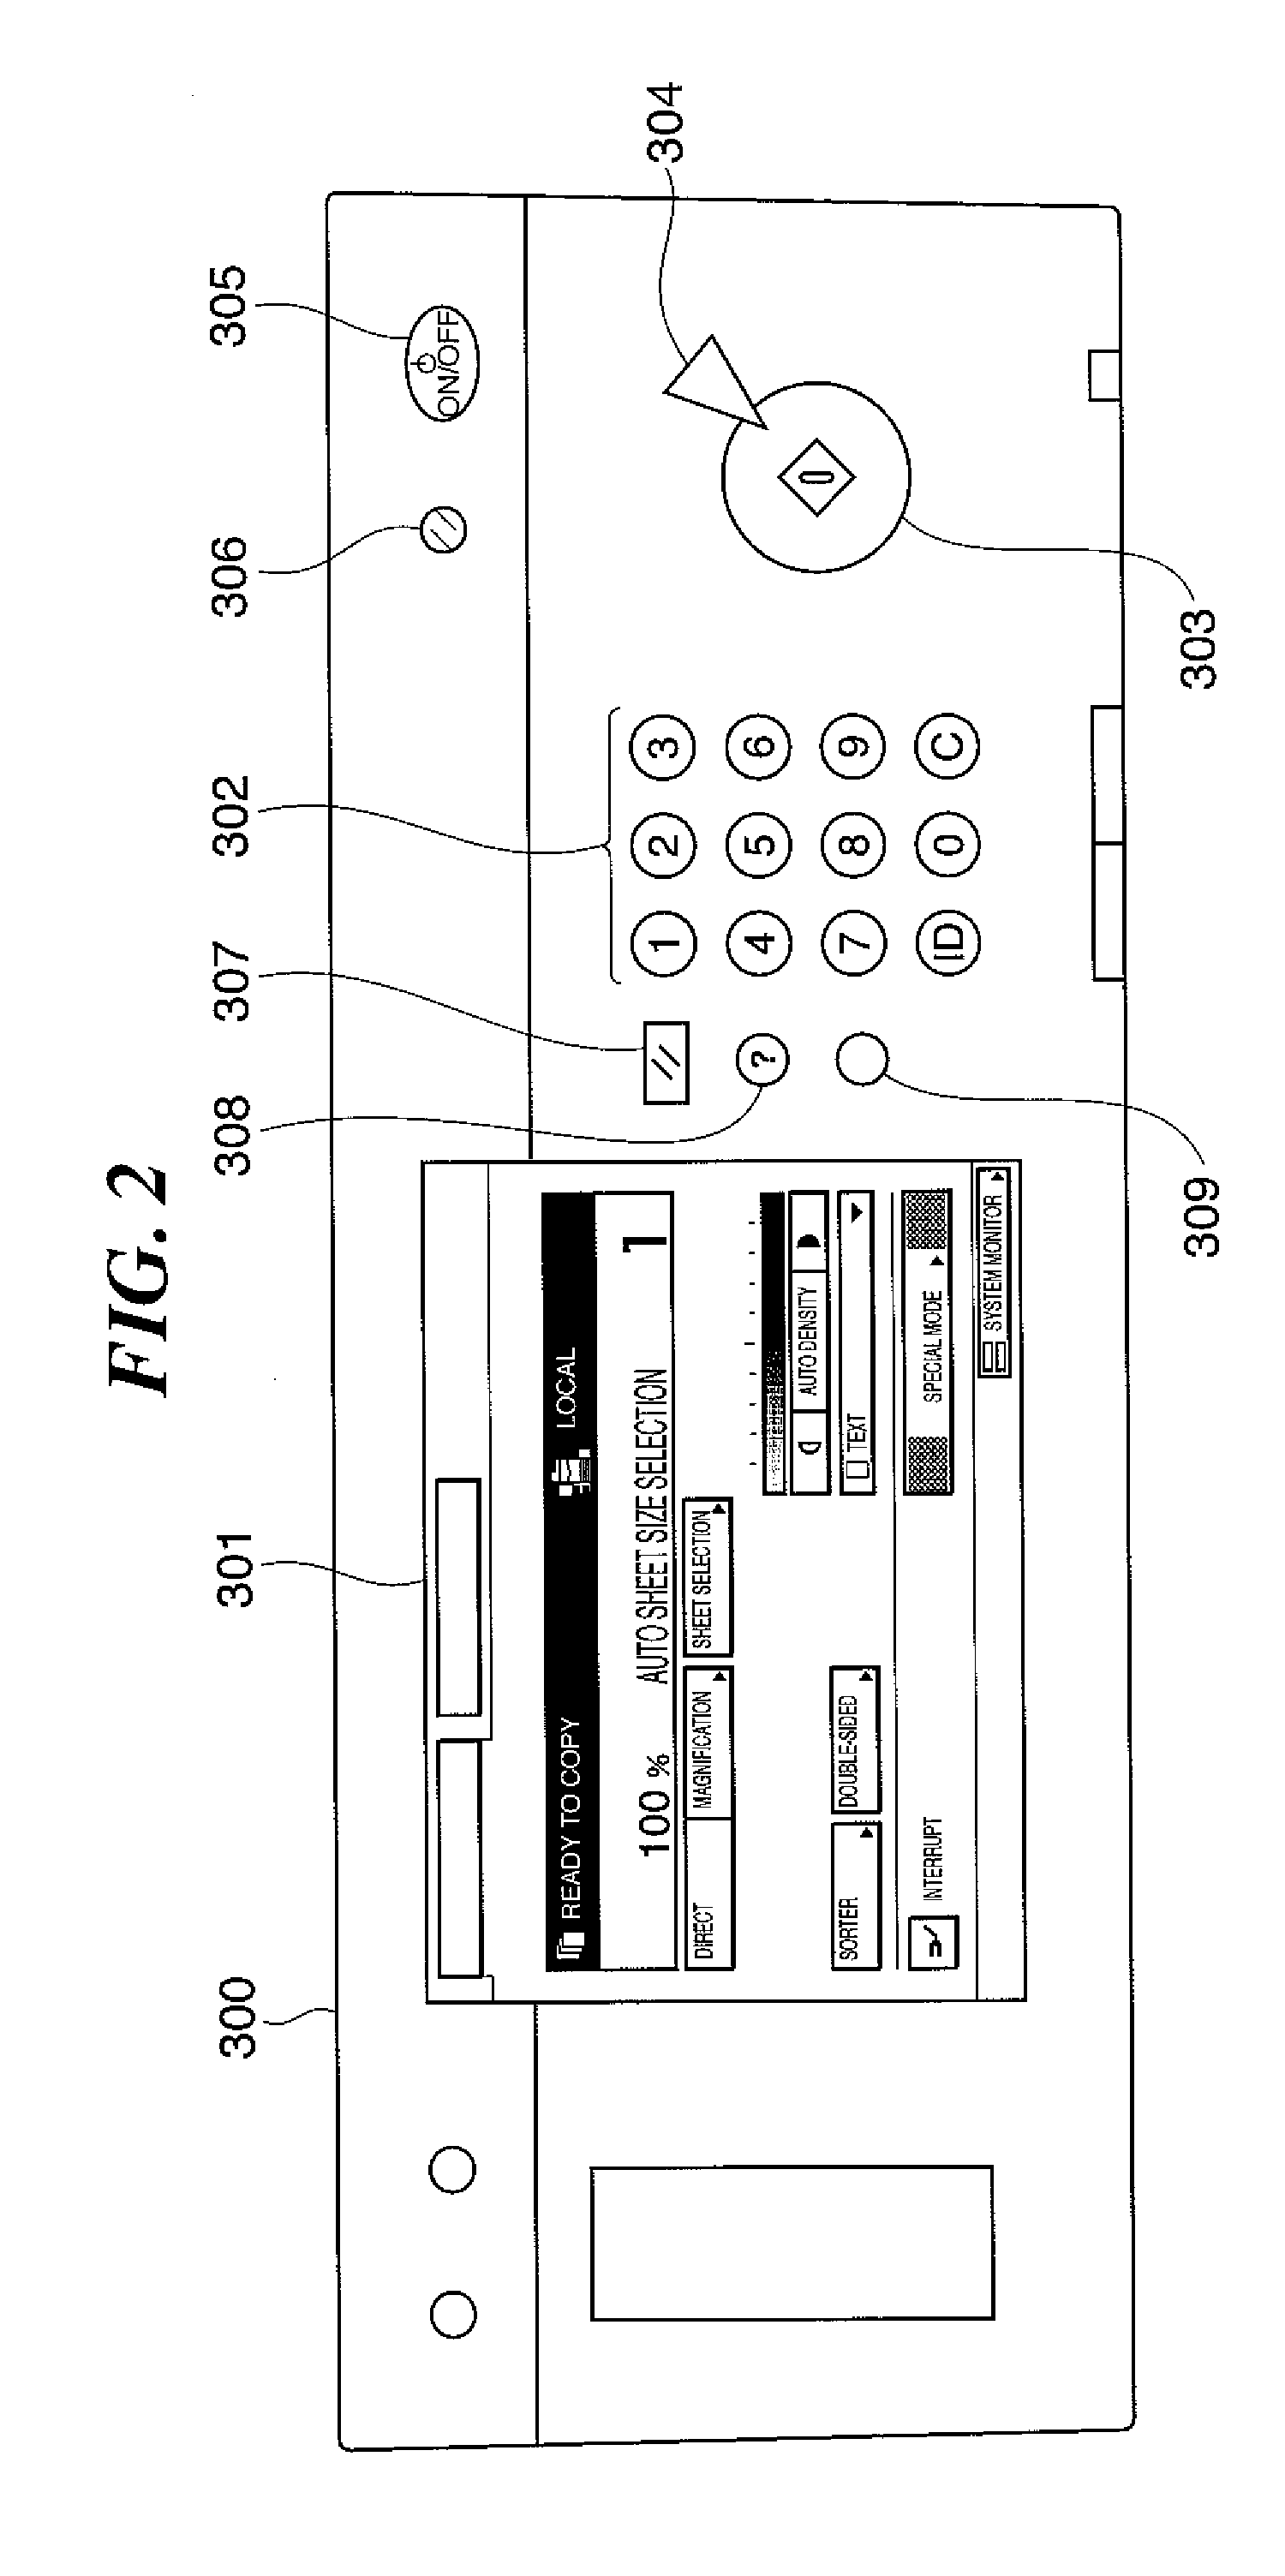 Image forming system and clear coating apparatus